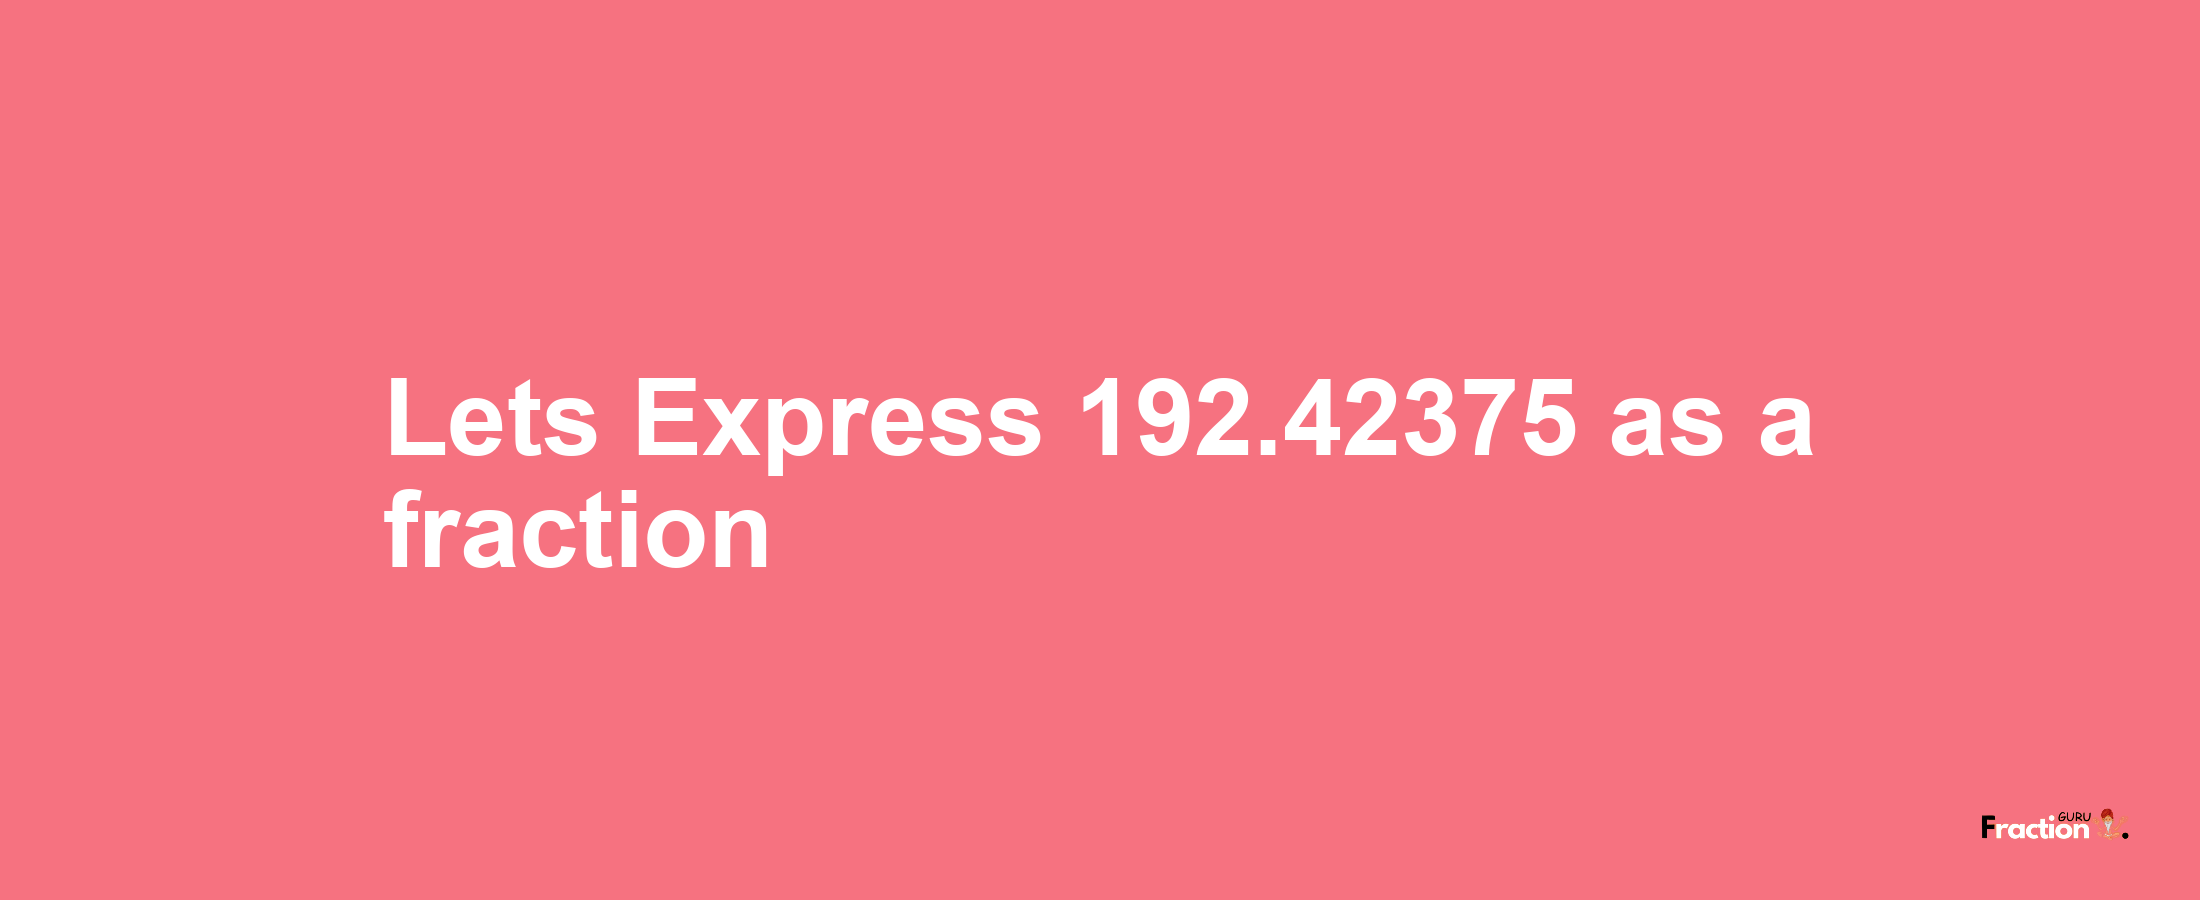 Lets Express 192.42375 as afraction